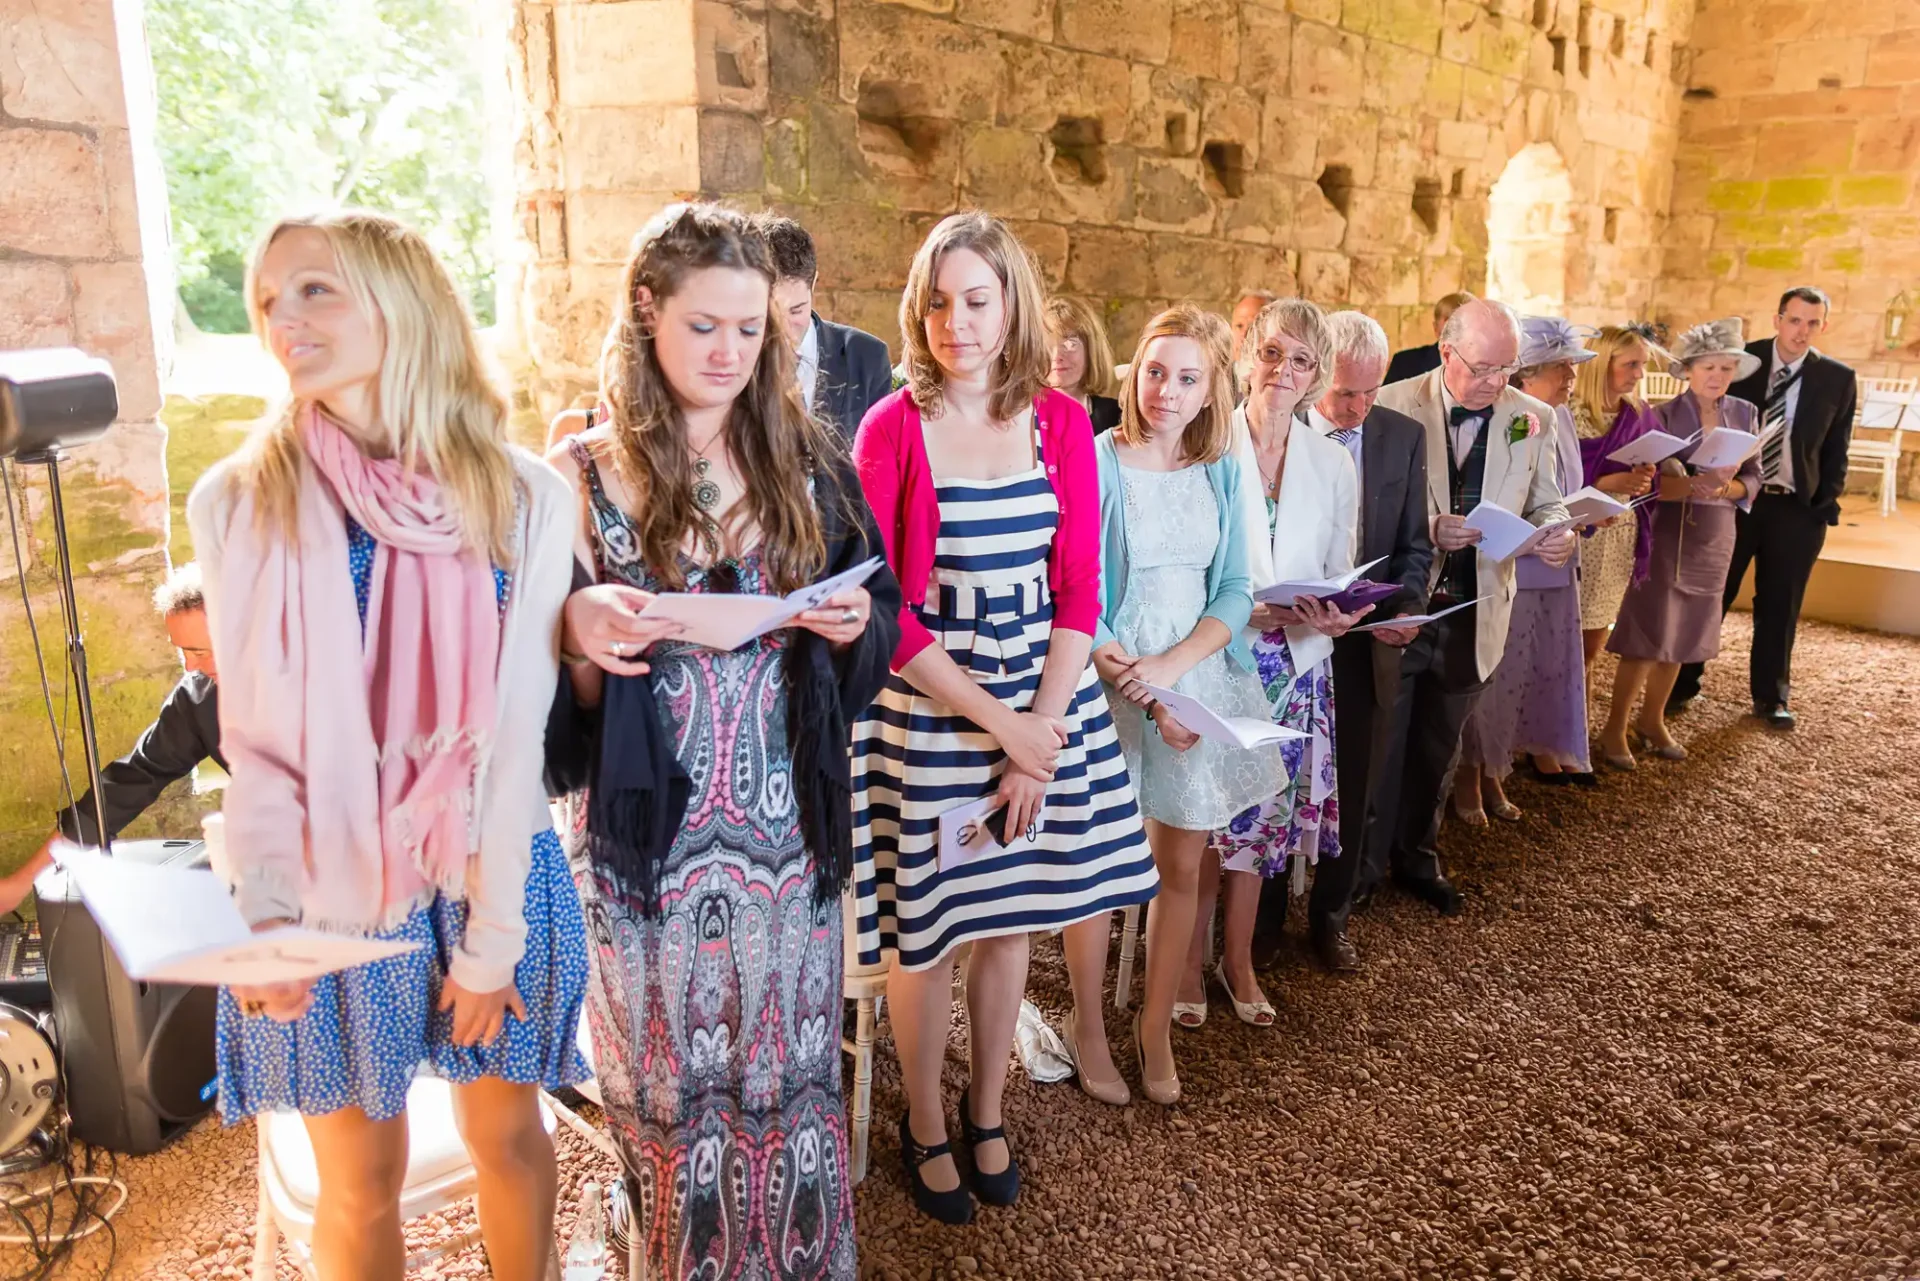 Group of people standing and singing from hymn sheets at a ceremony inside a stone-walled building with sunlight streaming through.